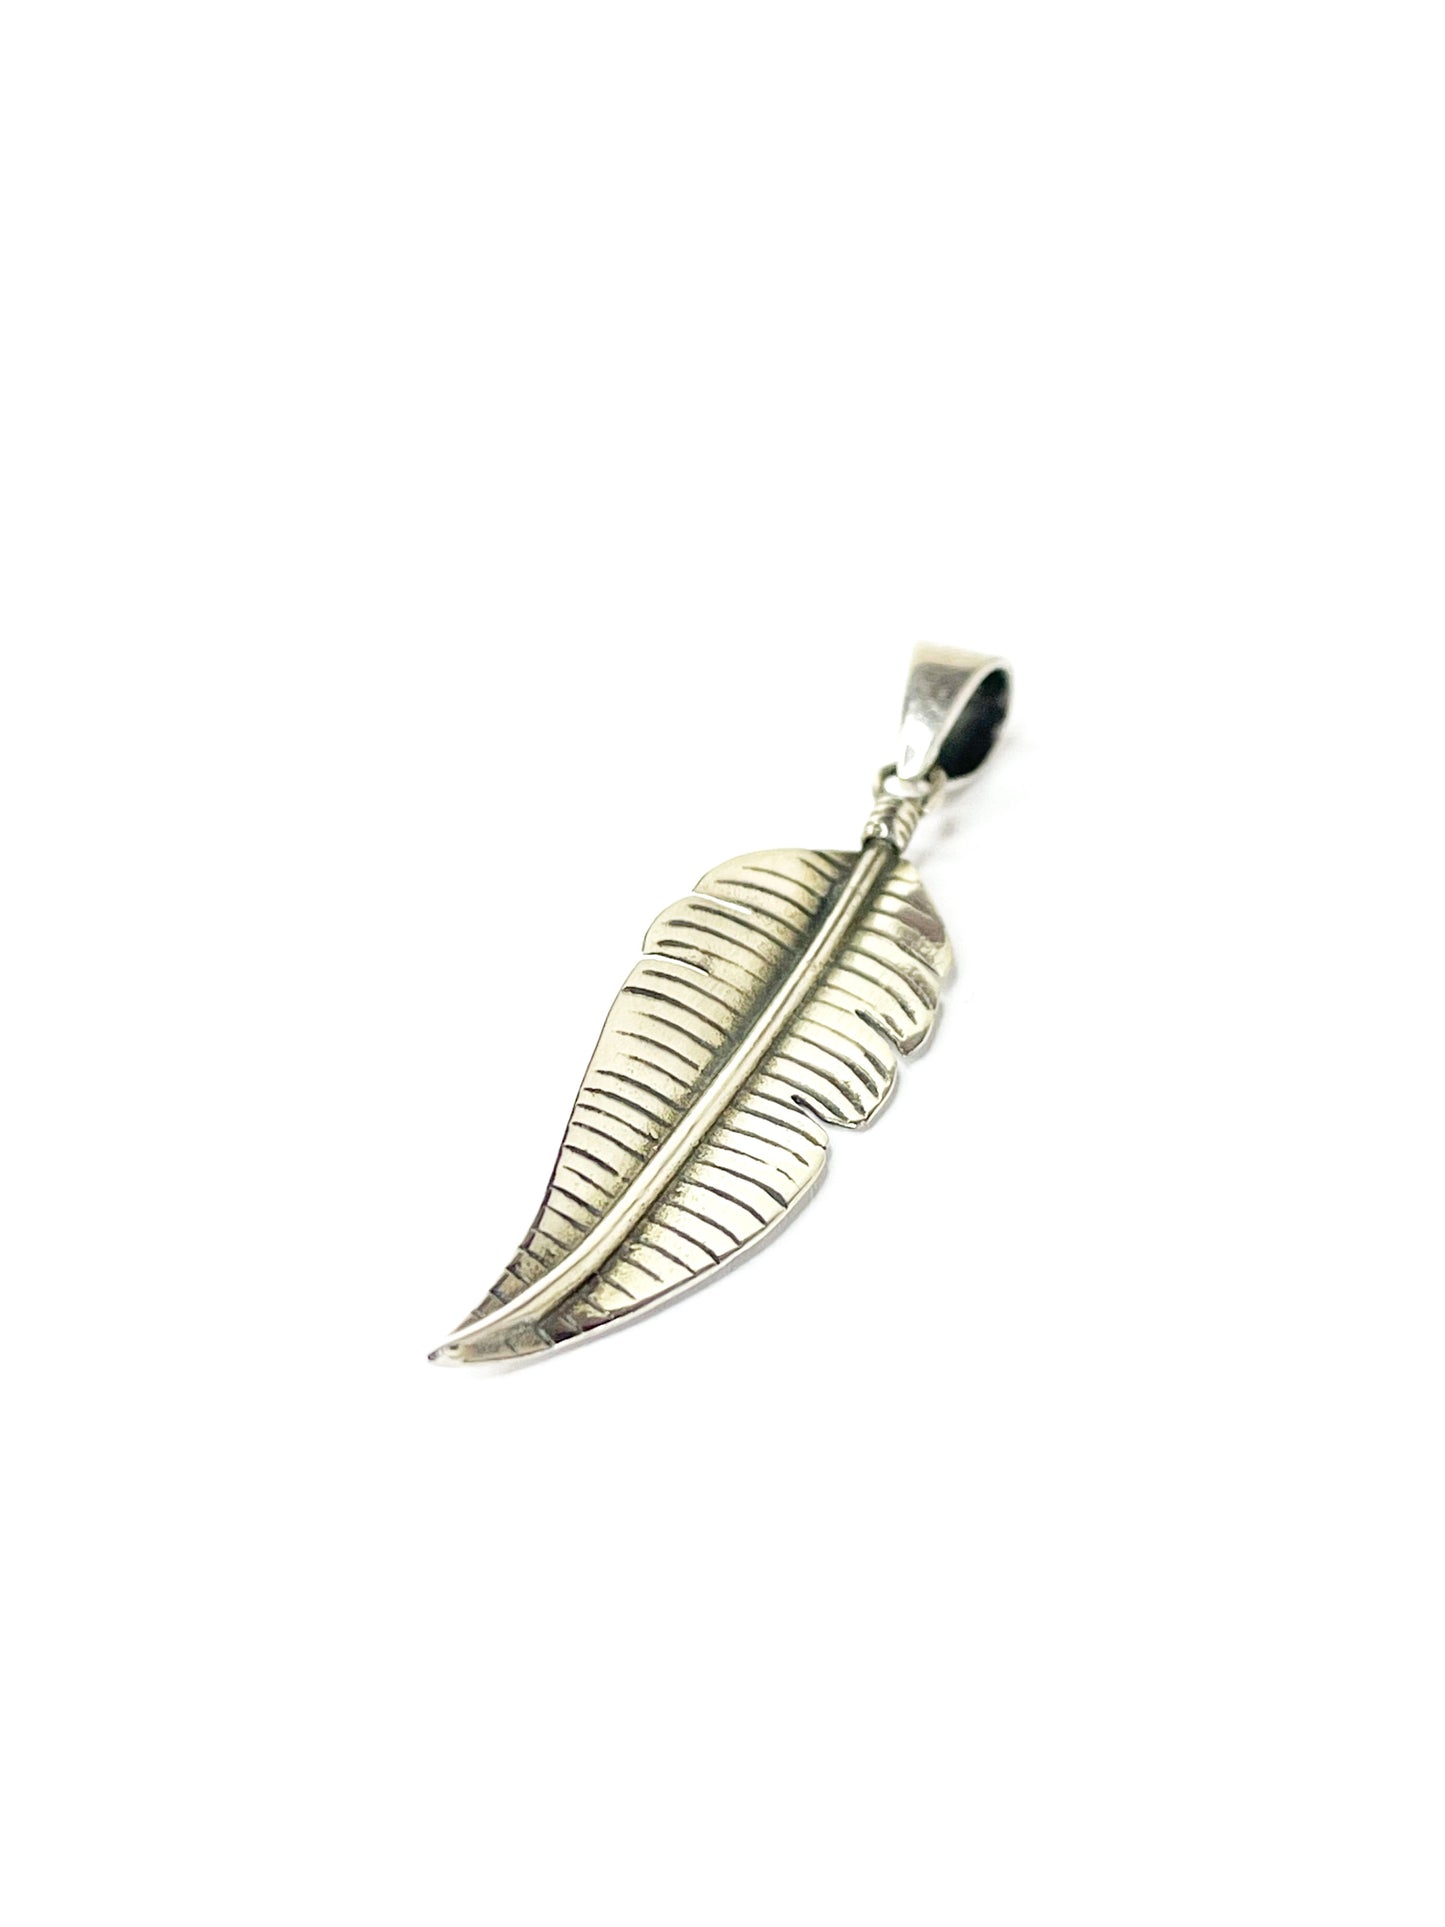 Feather pendant silver